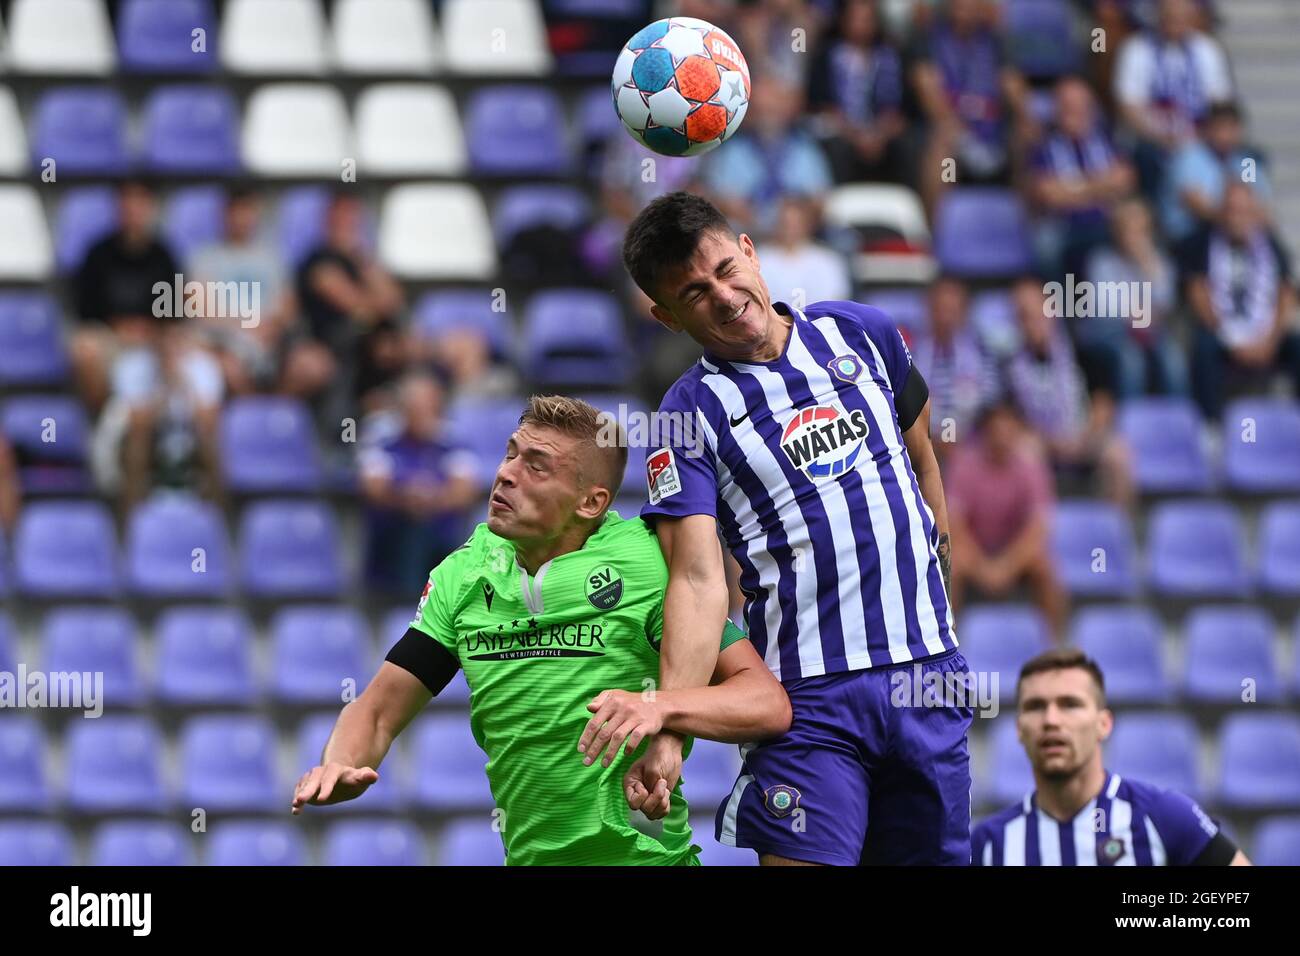 Aue, Germany. 22nd Aug, 2021. Football: 2. Bundesliga, Matchday 4, FC Erzgebirge Aue - SV Sandhausen at Erzgebirgsstadion. Aue's Antonio Jonjic (r) and Sandhausen's Aleksandr Zhirov fight for the ball. Credit: Hendrik Schmidt/dpa-Zentralbild/dpa - IMPORTANT NOTE: In accordance with the regulations of the DFL Deutsche Fußball Liga and/or the DFB Deutscher Fußball-Bund, it is prohibited to use or have used photographs taken in the stadium and/or of the match in the form of sequence pictures and/or video-like photo series./dpa/Alamy Live News Stock Photo